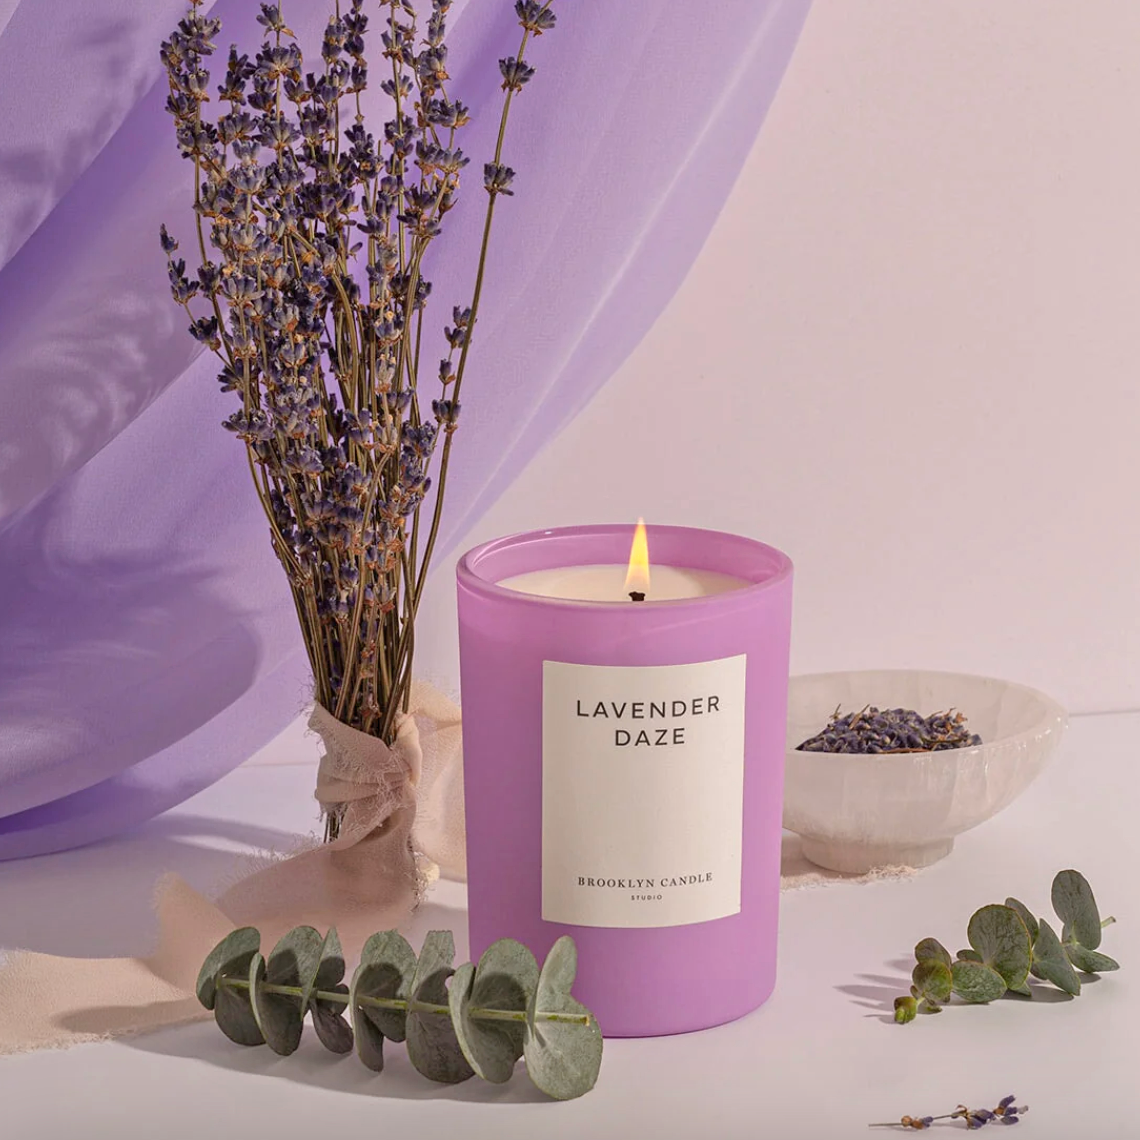 Lavender Daze Limited Edition Candle | Brooklyn Candle Studio | Prelude & Dawn Los Angeles